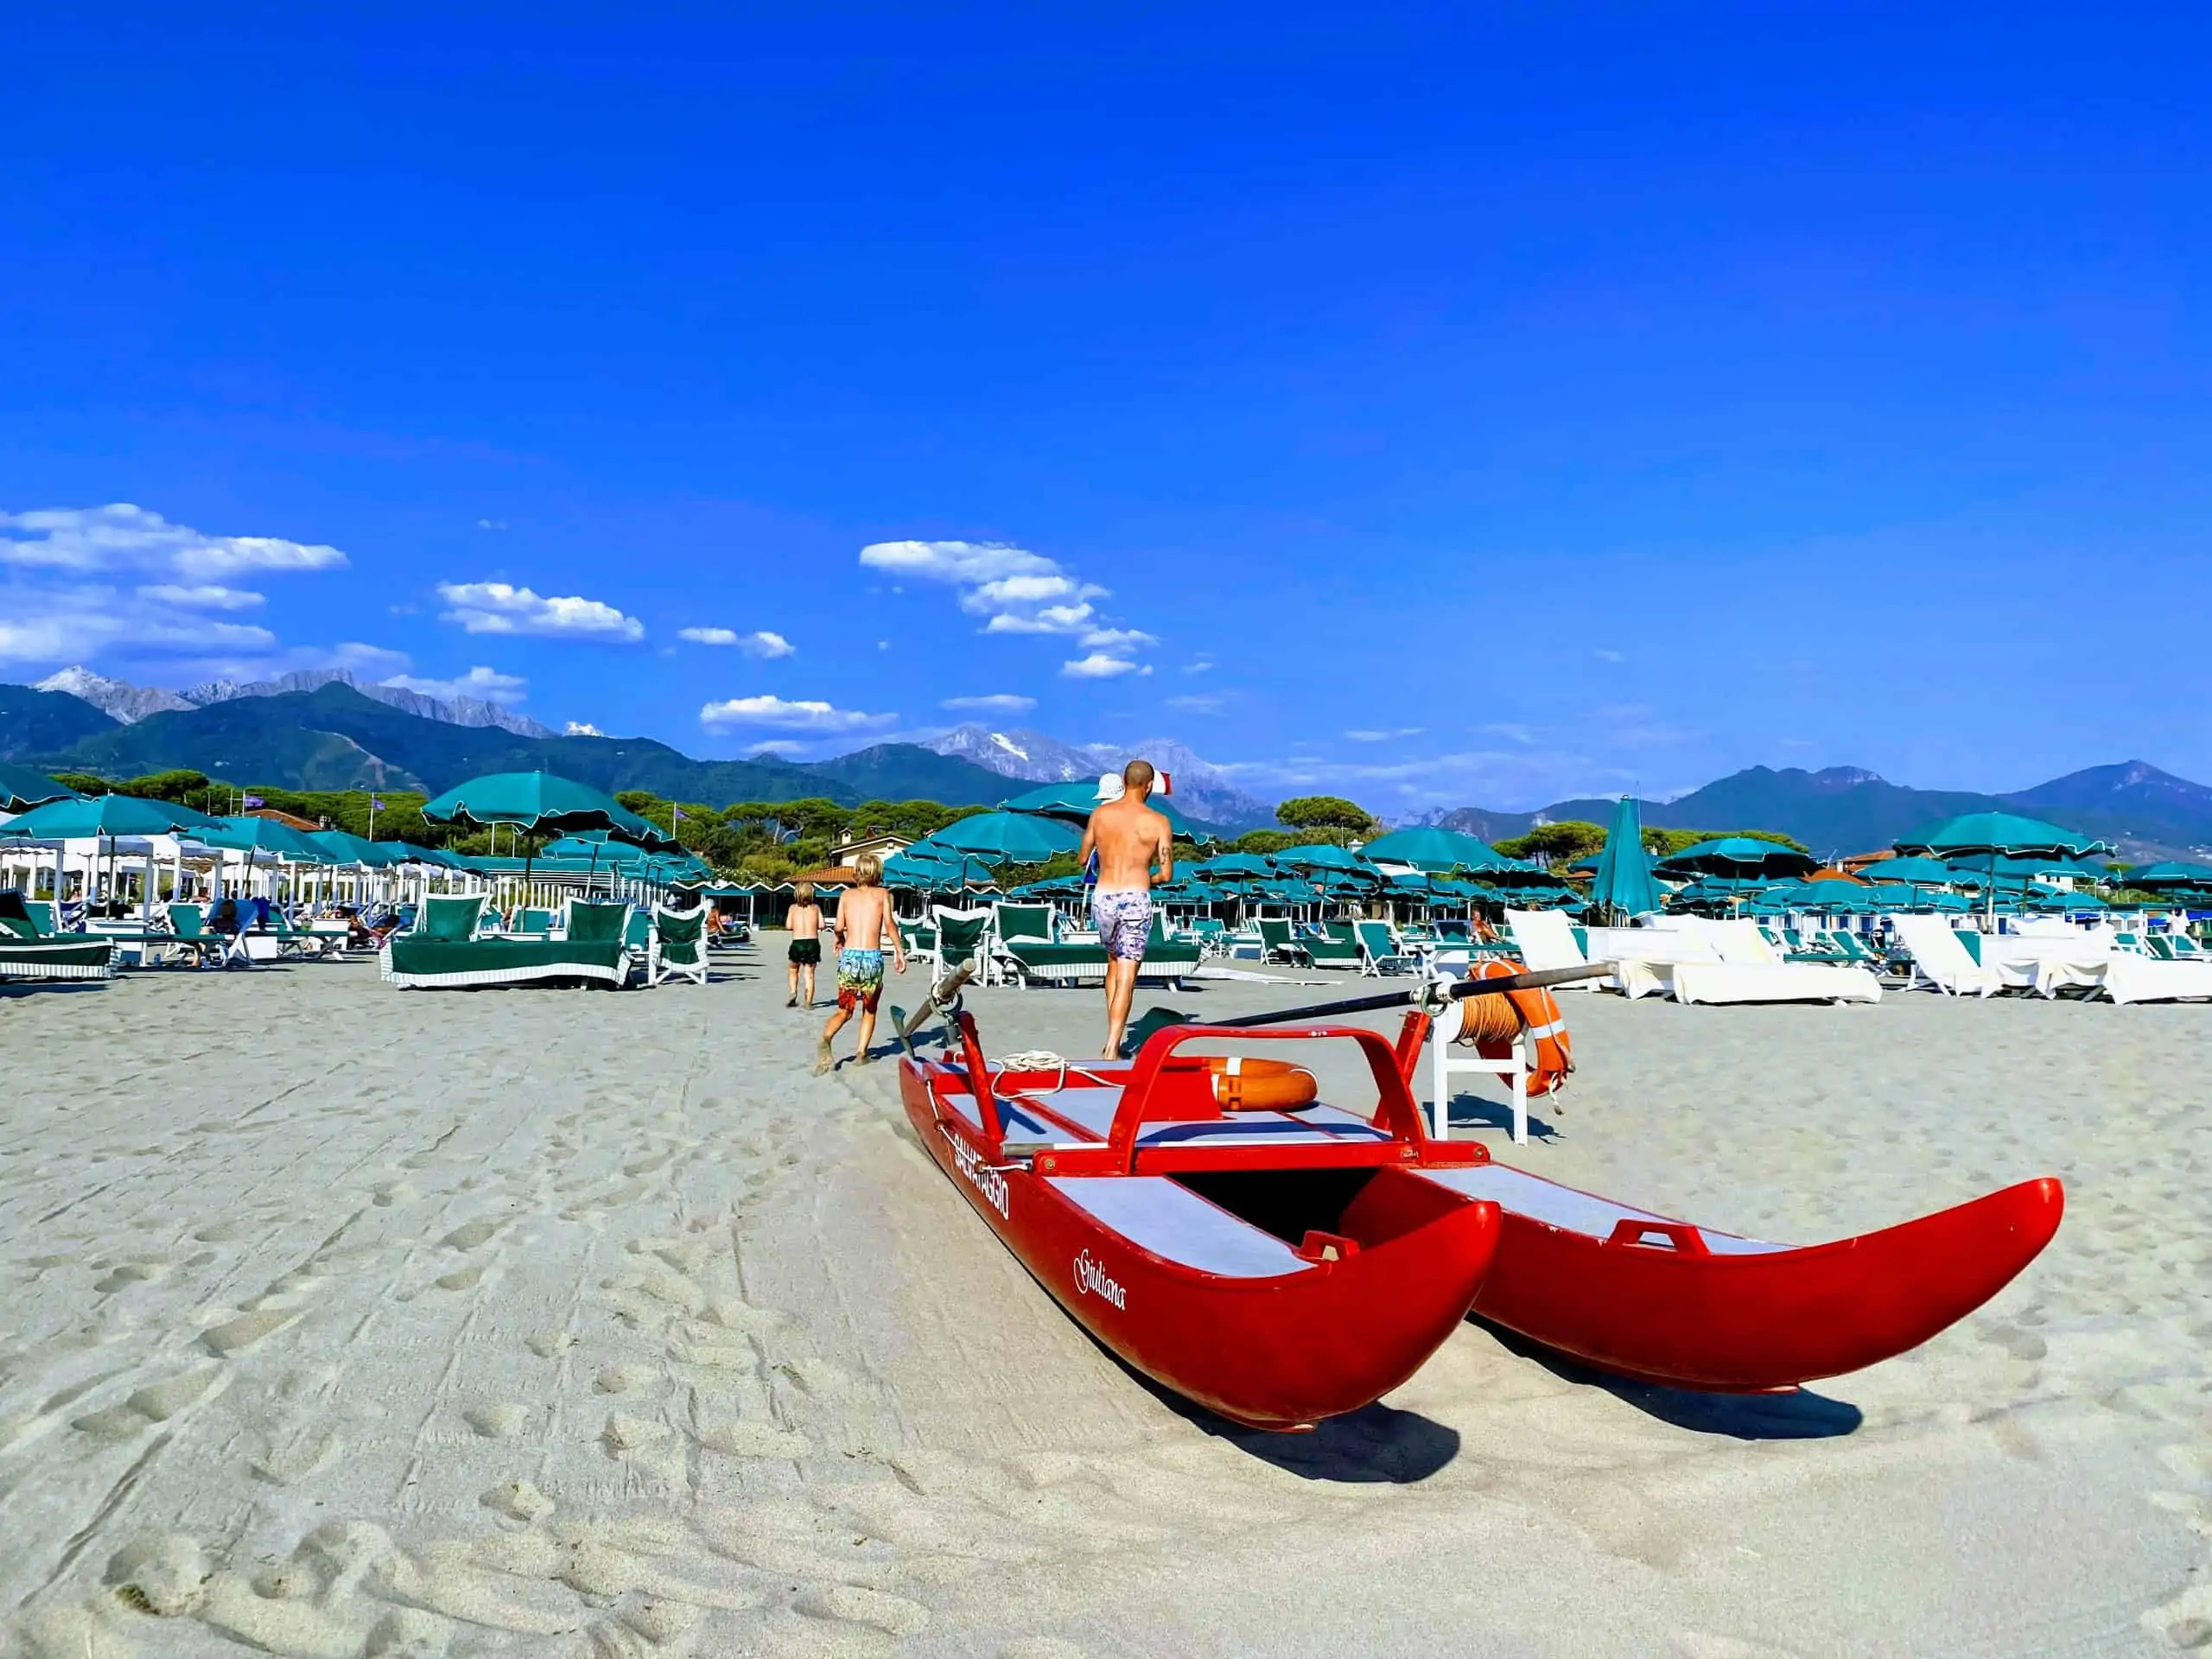 beach with red lifeguard boat on sand in forte dei marmi, italy